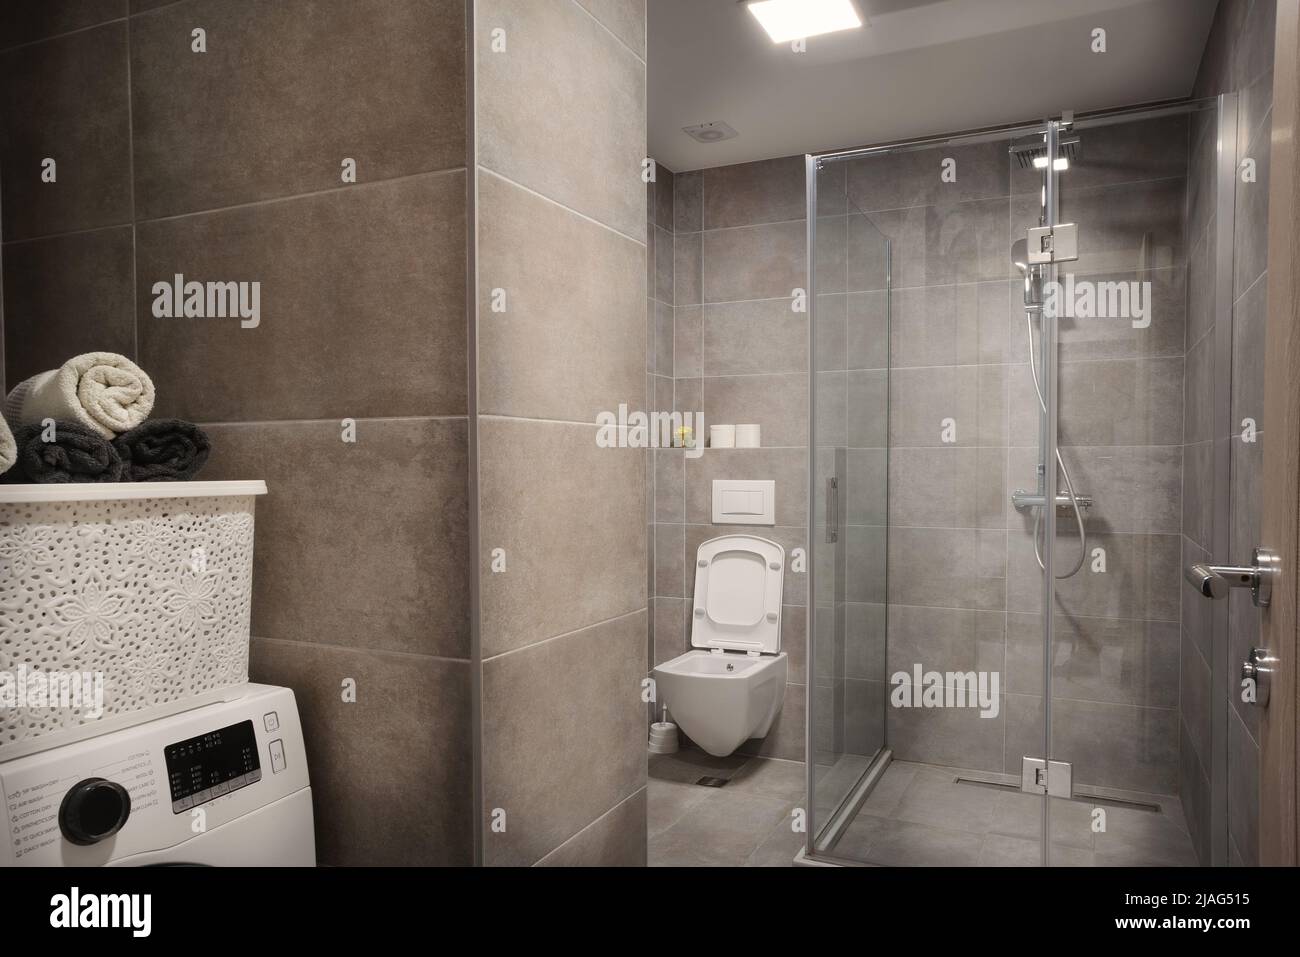 Interior of a new and modern small bathroom. Stock Photo